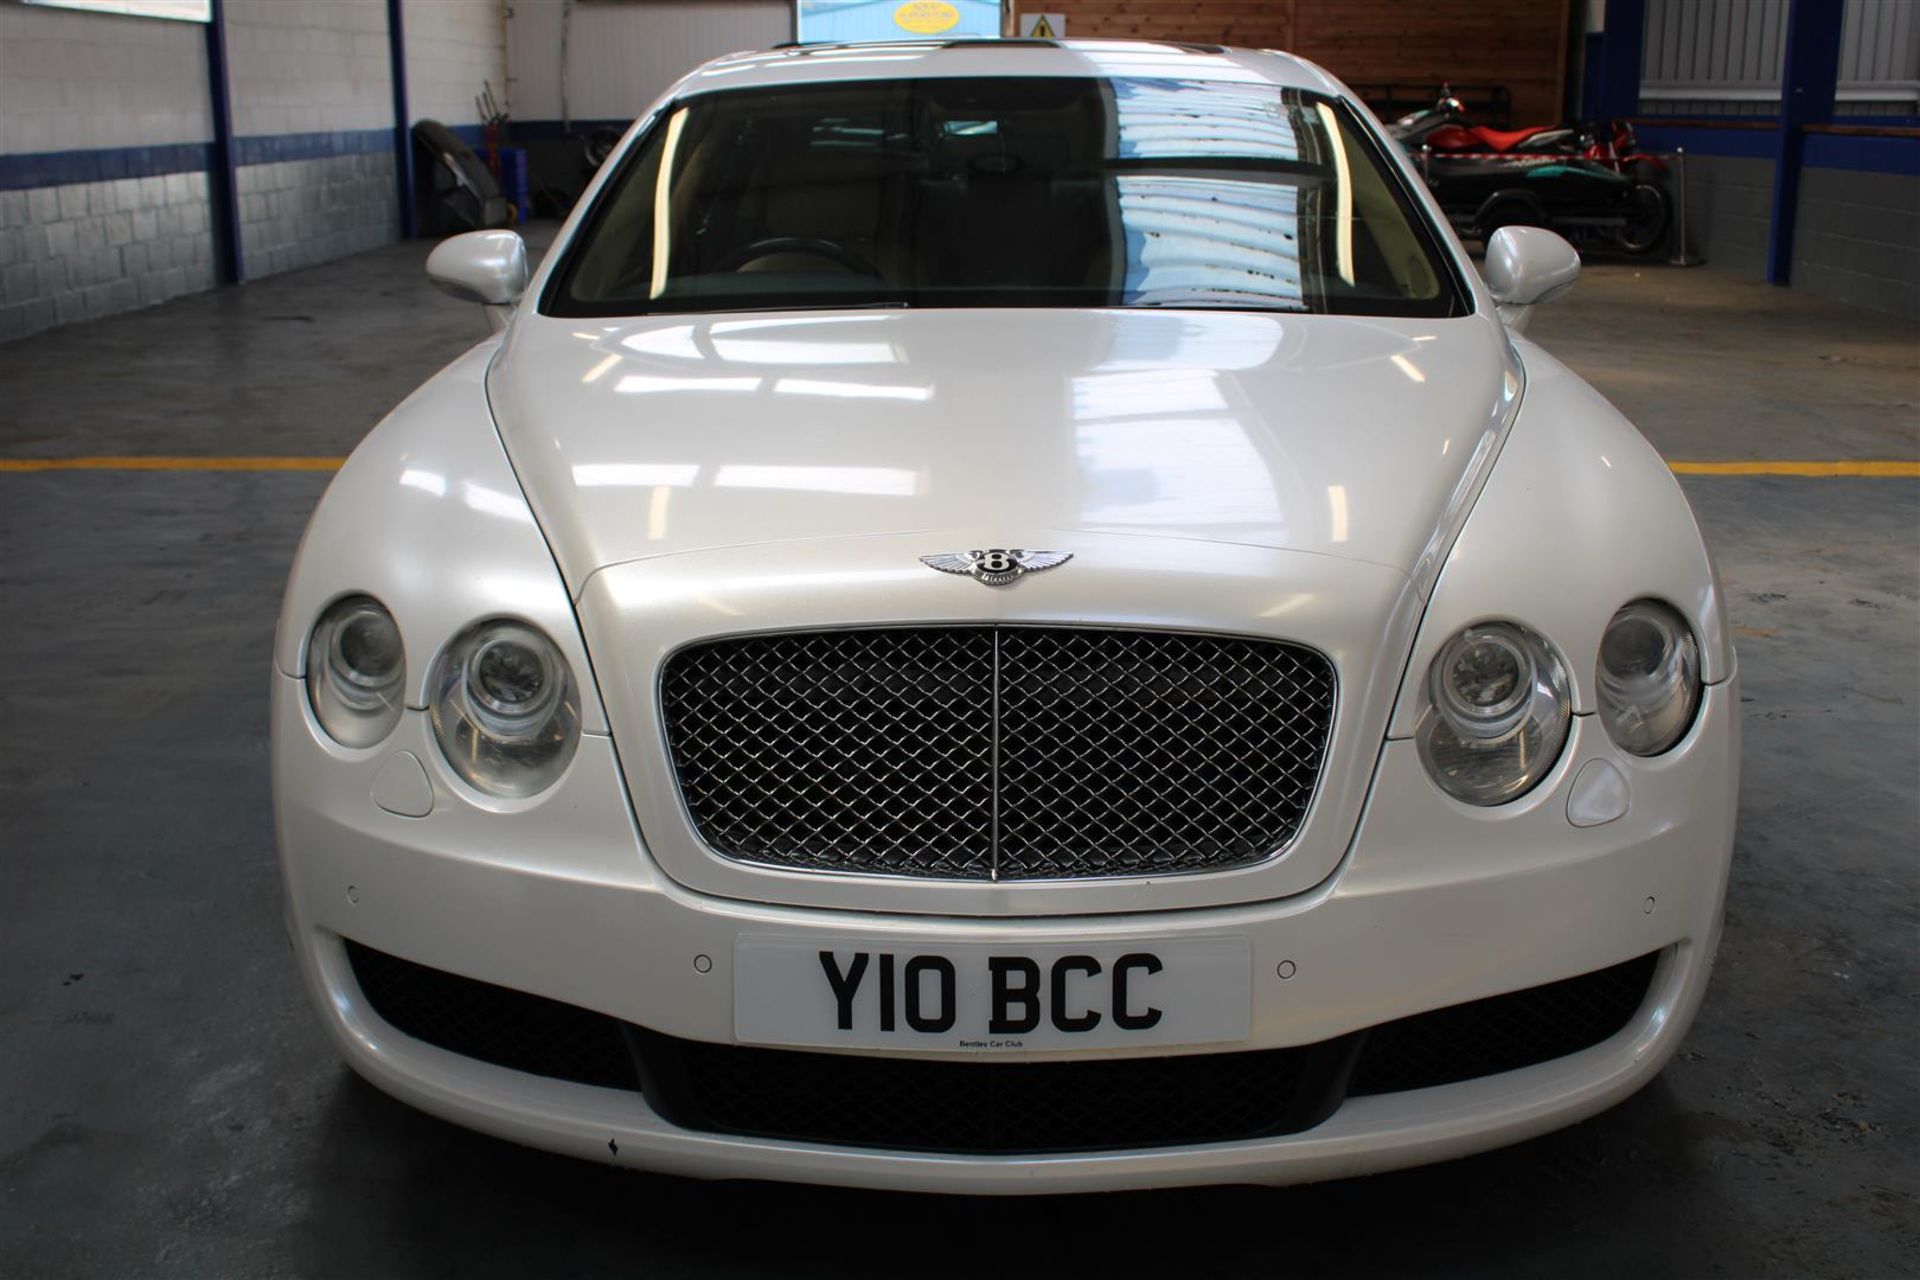 55 05 Bentley Cont. Flying Spur - Image 2 of 35